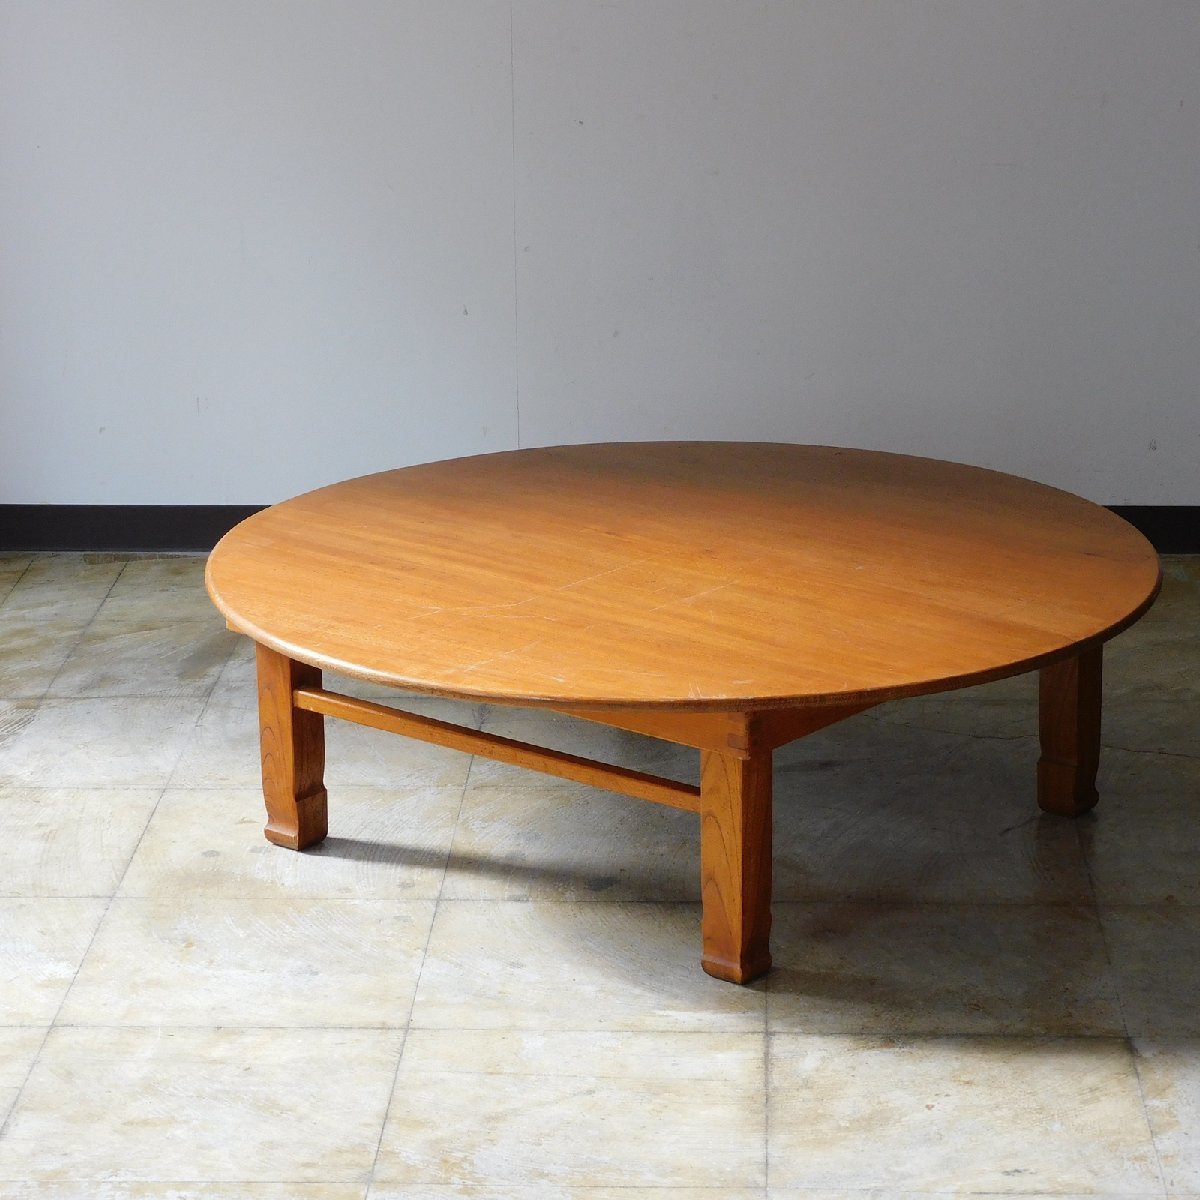 sen. tree screen large circle low dining table diameter 910mm HK-a-03419 / natural wood table antique furniture table . pcs working bench old tool desk 